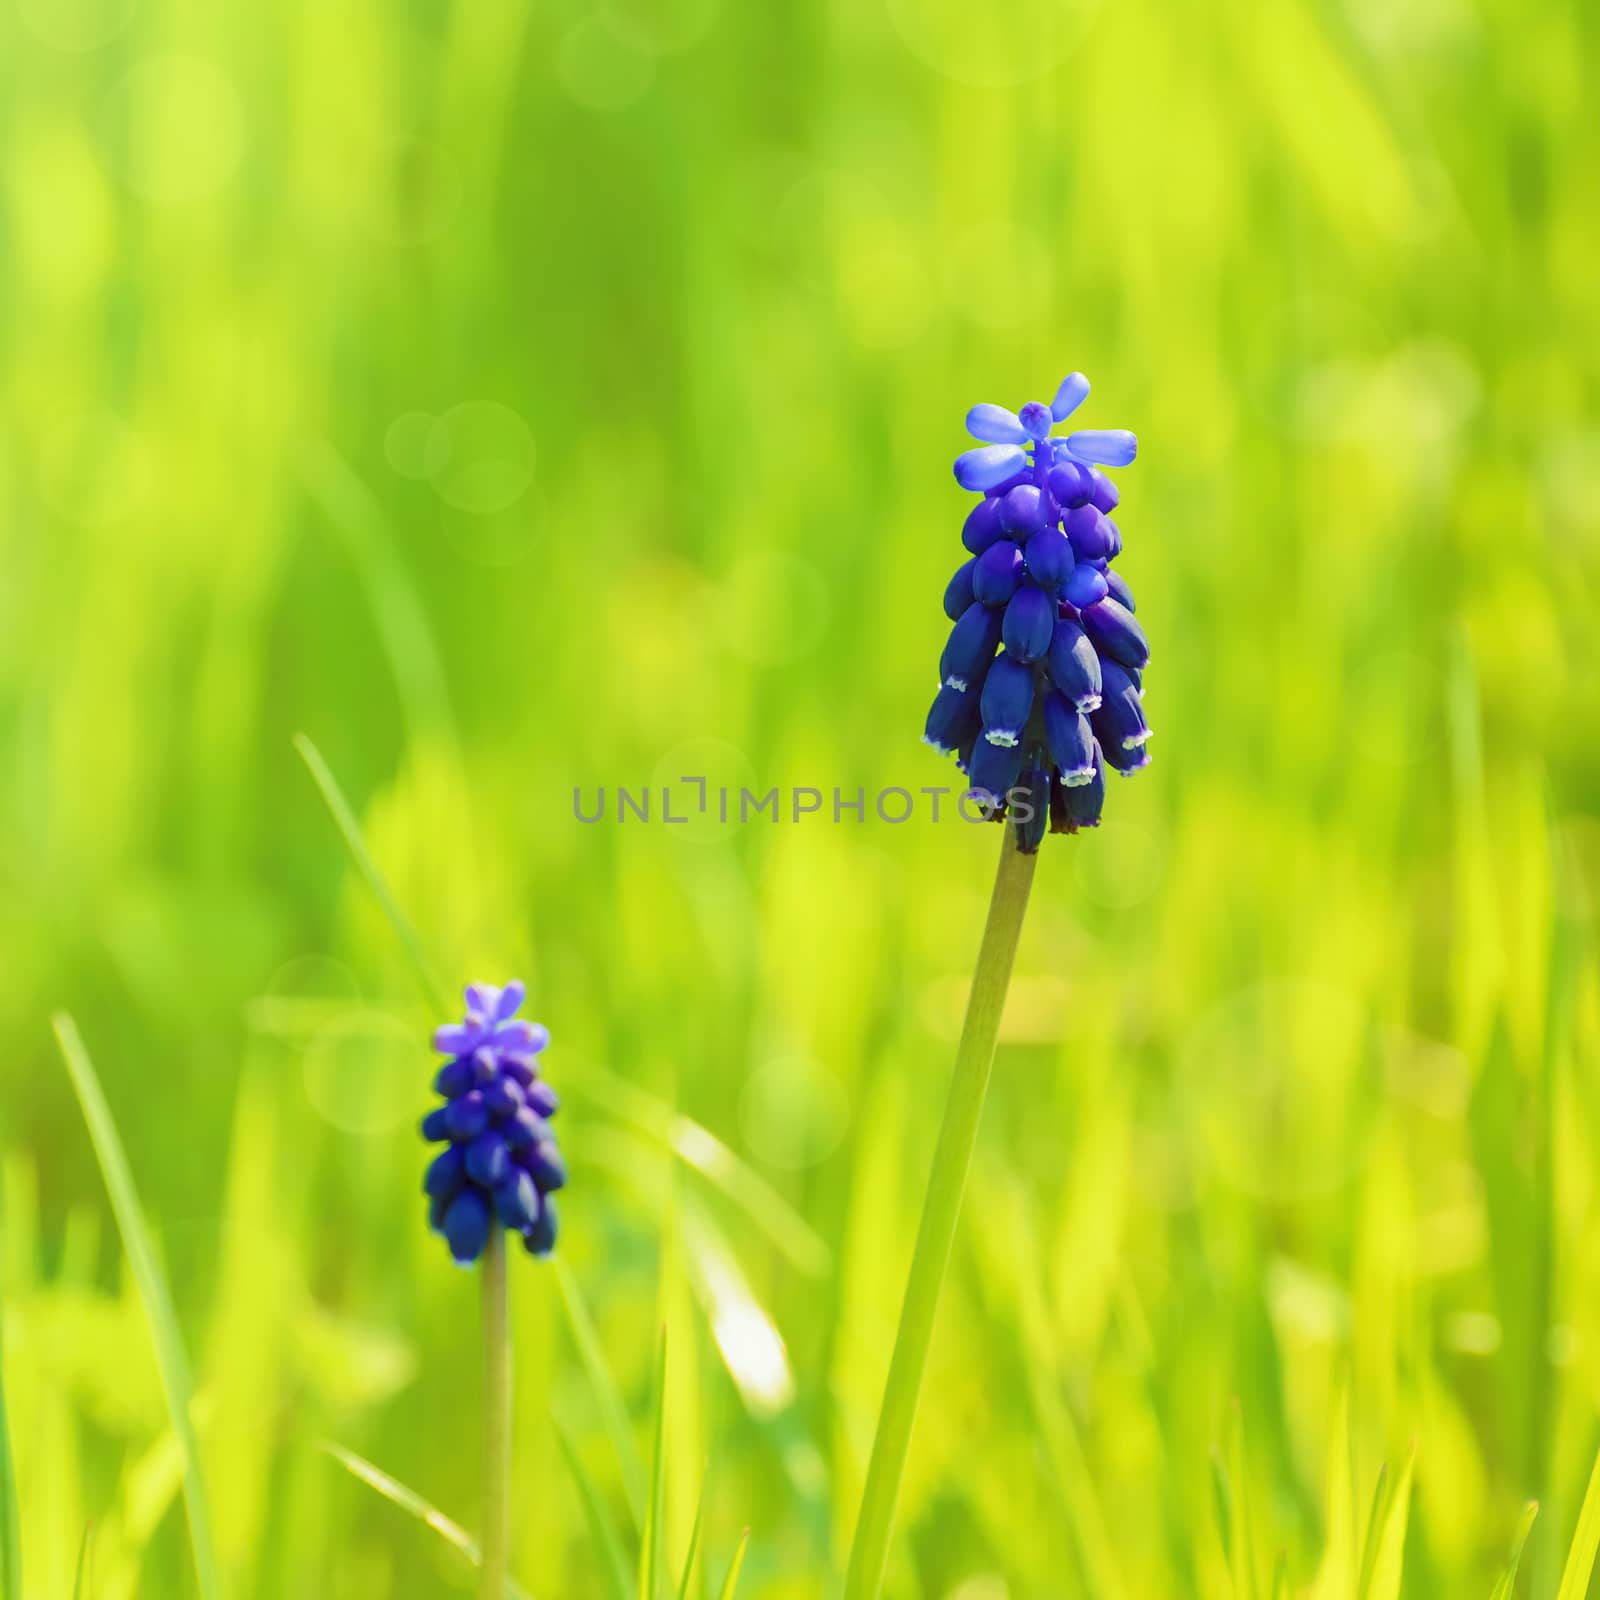 Muscari Flower In The Green Grass